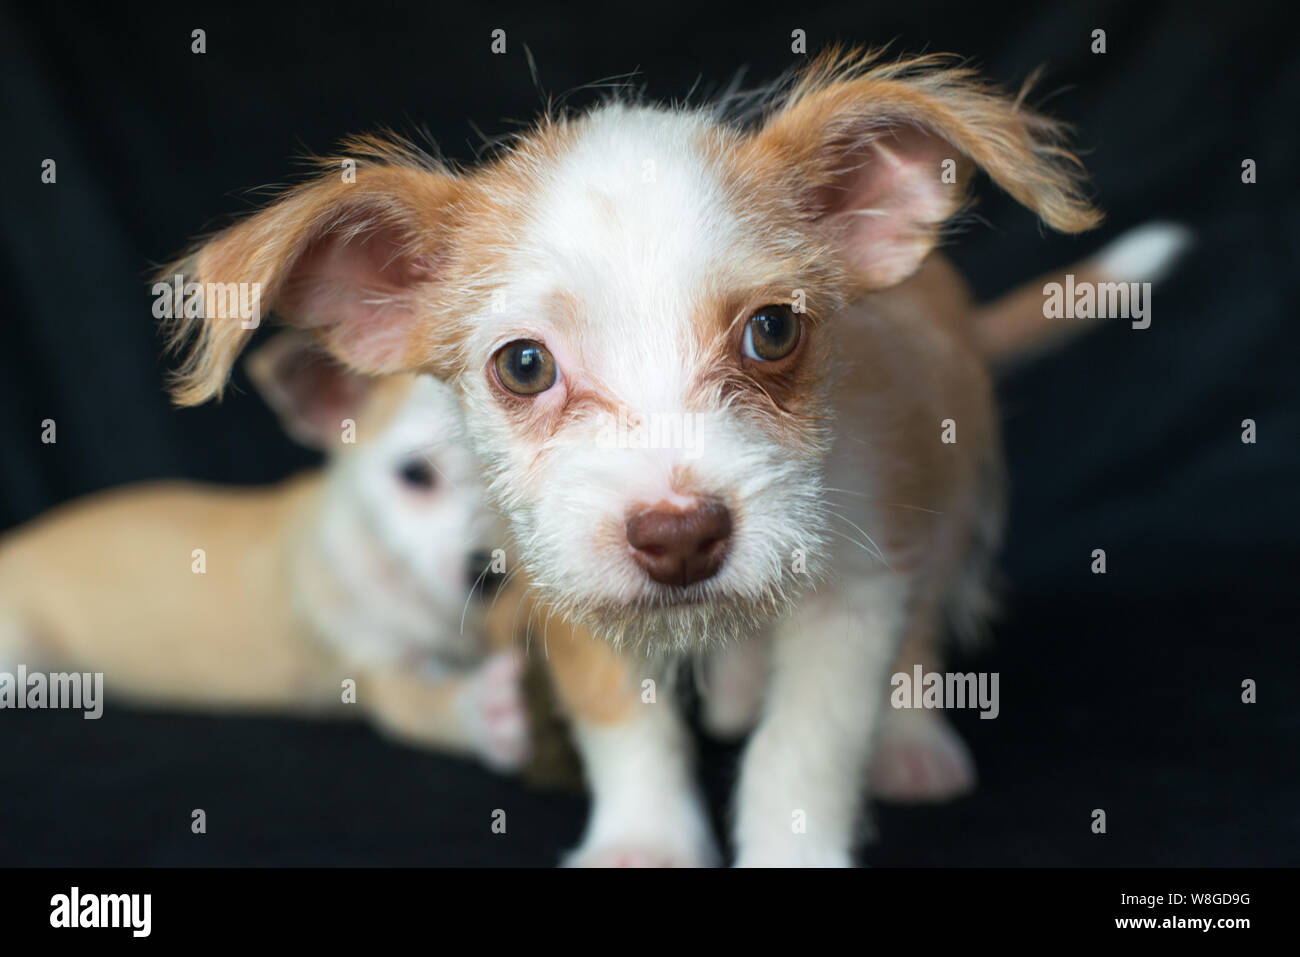 Rescue pup Farley and brother Neo in the background from Starpaws rescue foundation pose for photoshoot to be adopted Stock Photo